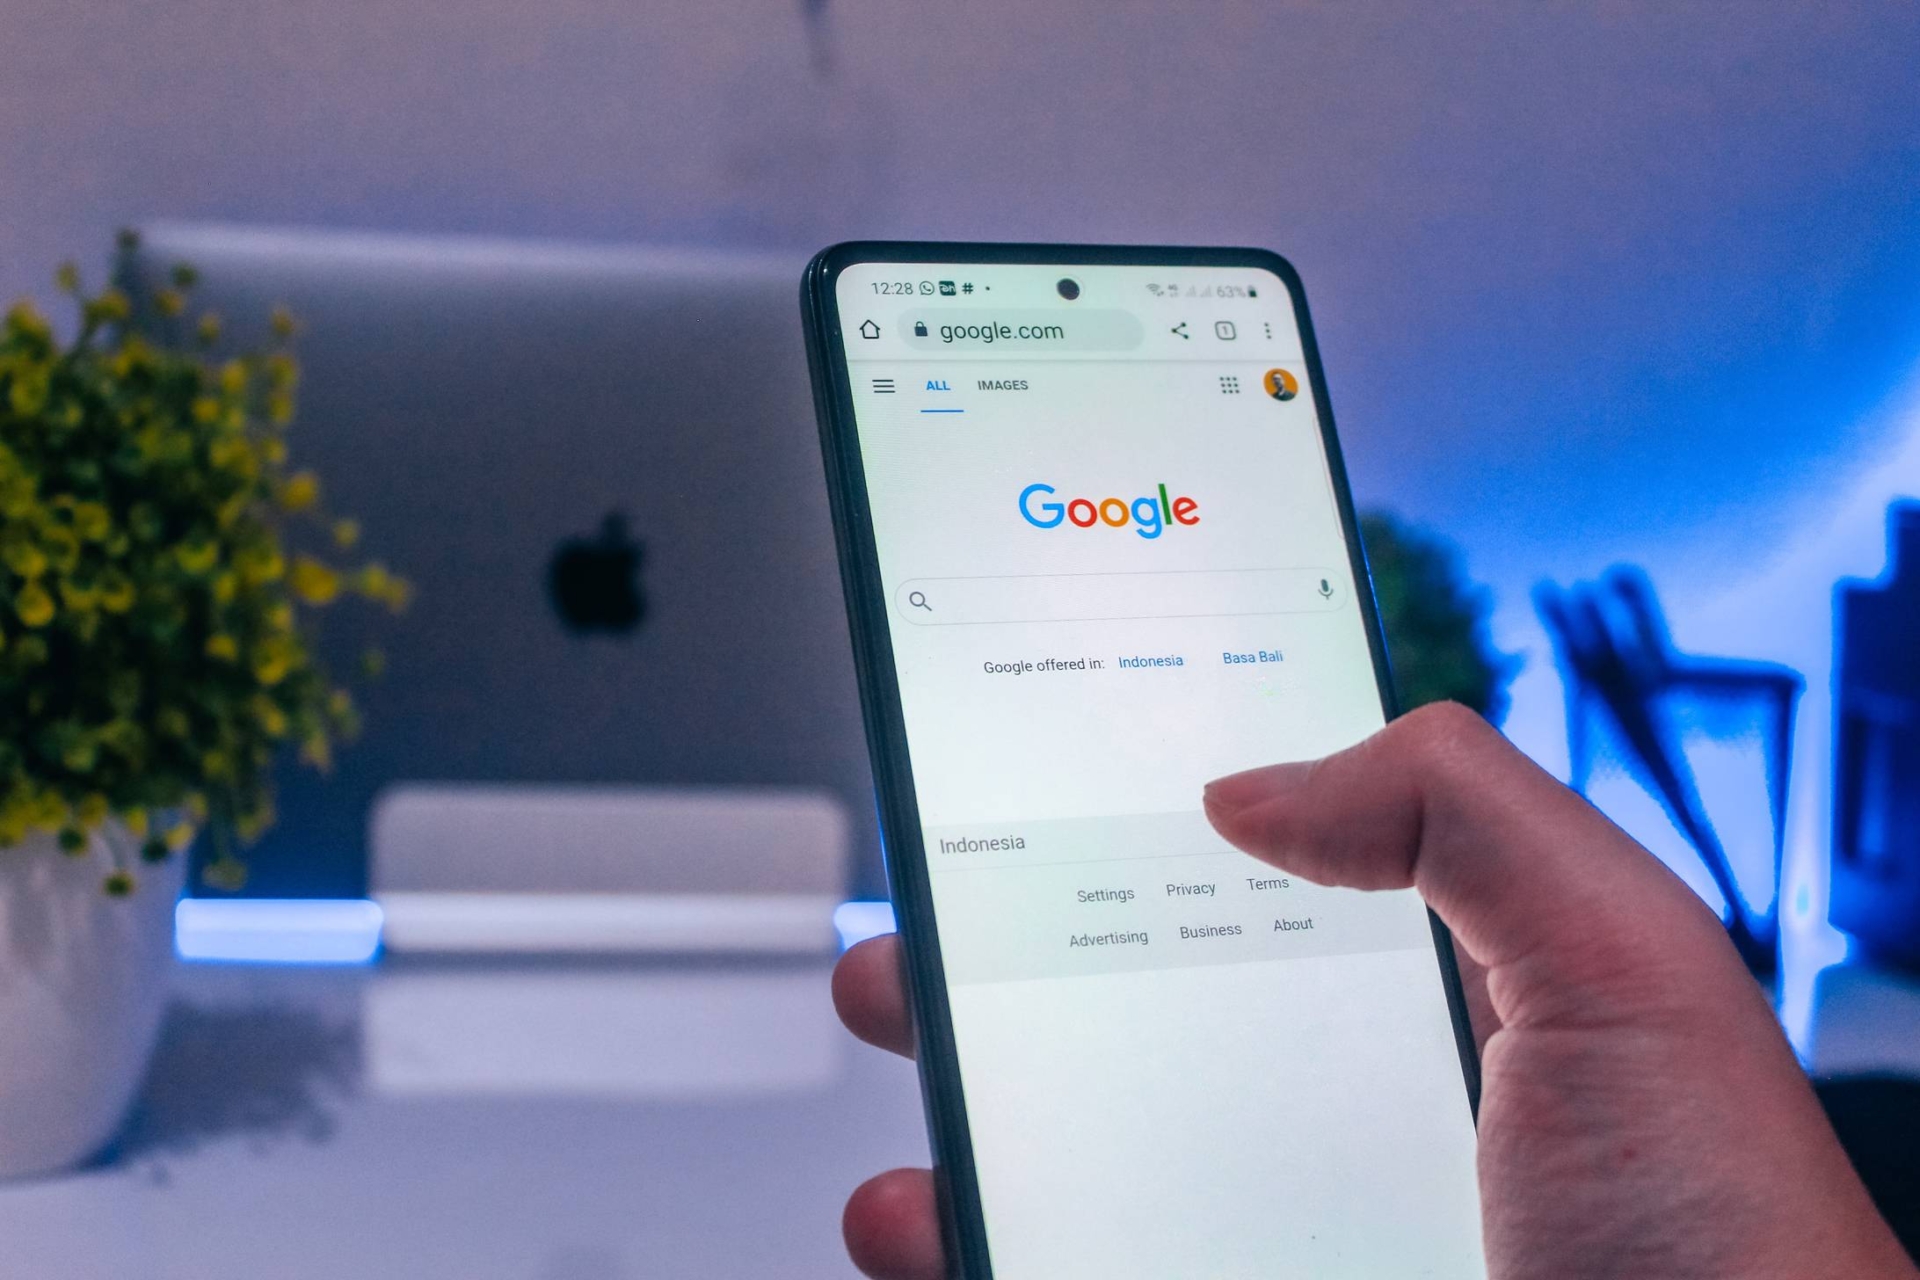 Google ads picture by Arkan Perdana on Unsplash.